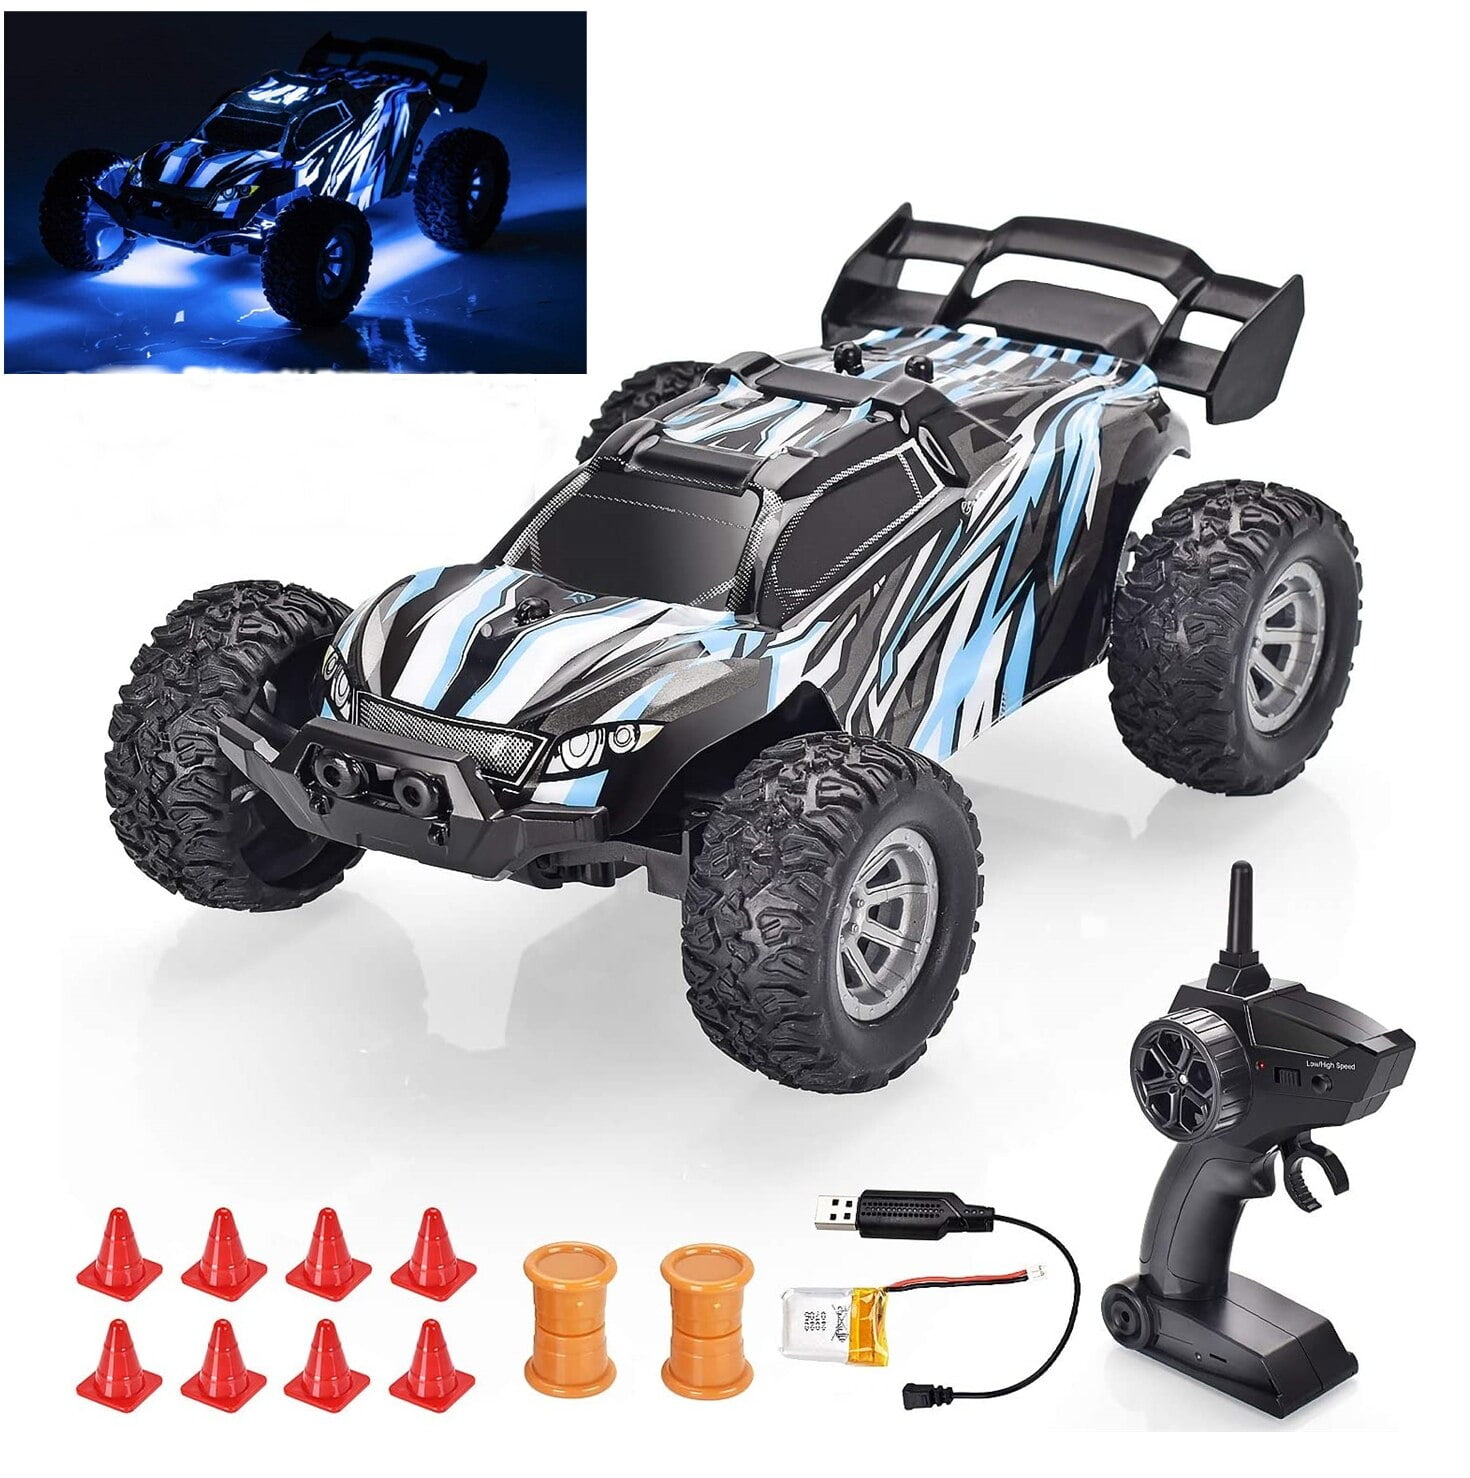 5 Channel Button cotton 1:24 Four-Wheel Drive Crawler Excavator Remote Control Educational Toy with Light Toy RC Vehicles 